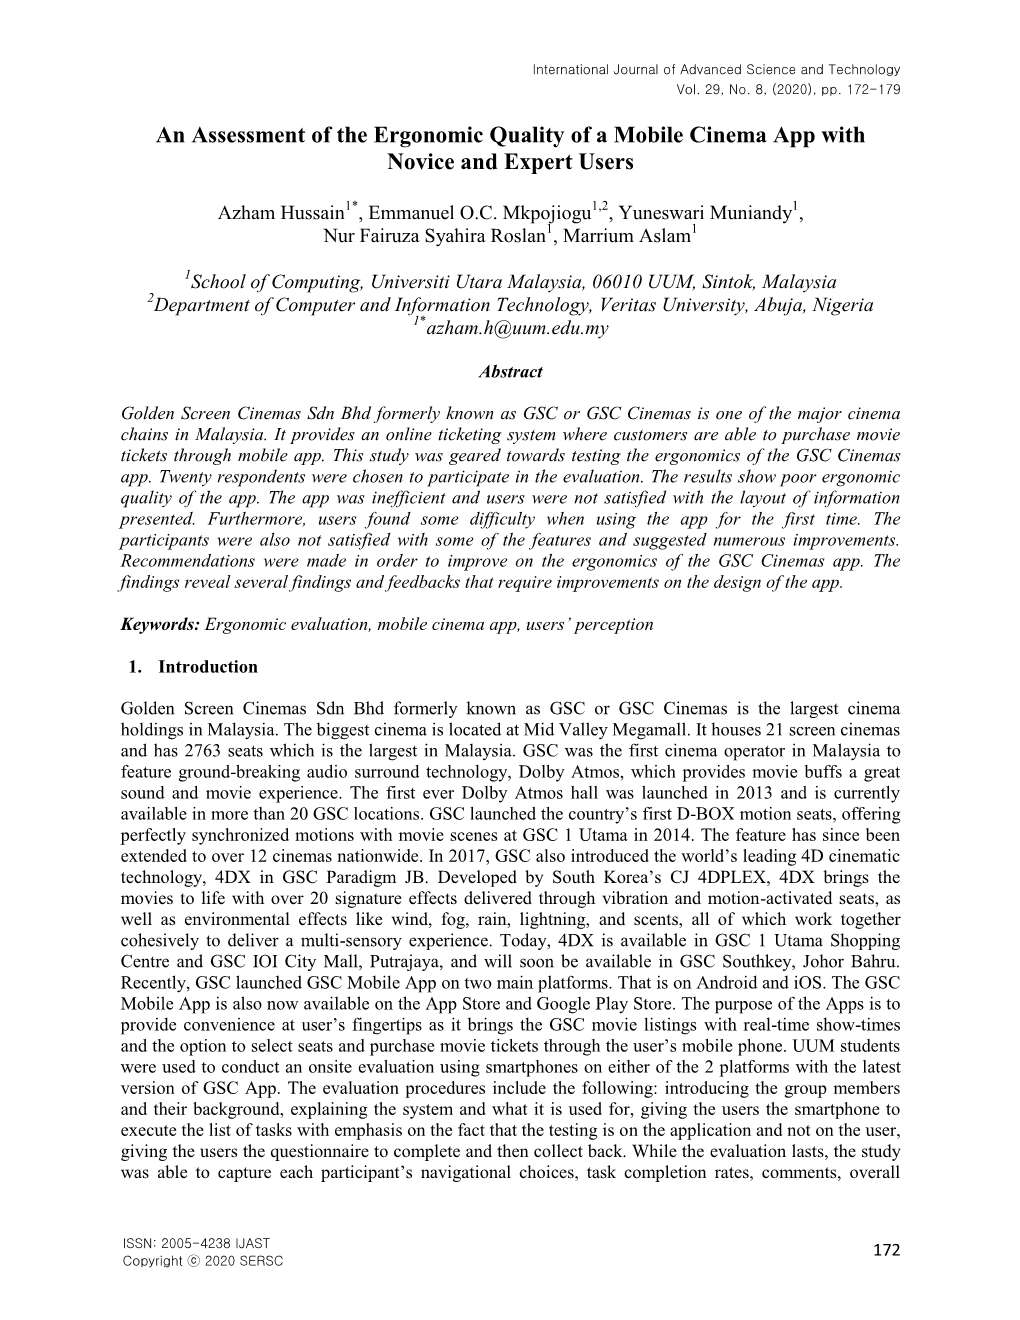 An Assessment of the Ergonomic Quality of a Mobile Cinema App with Novice and Expert Users